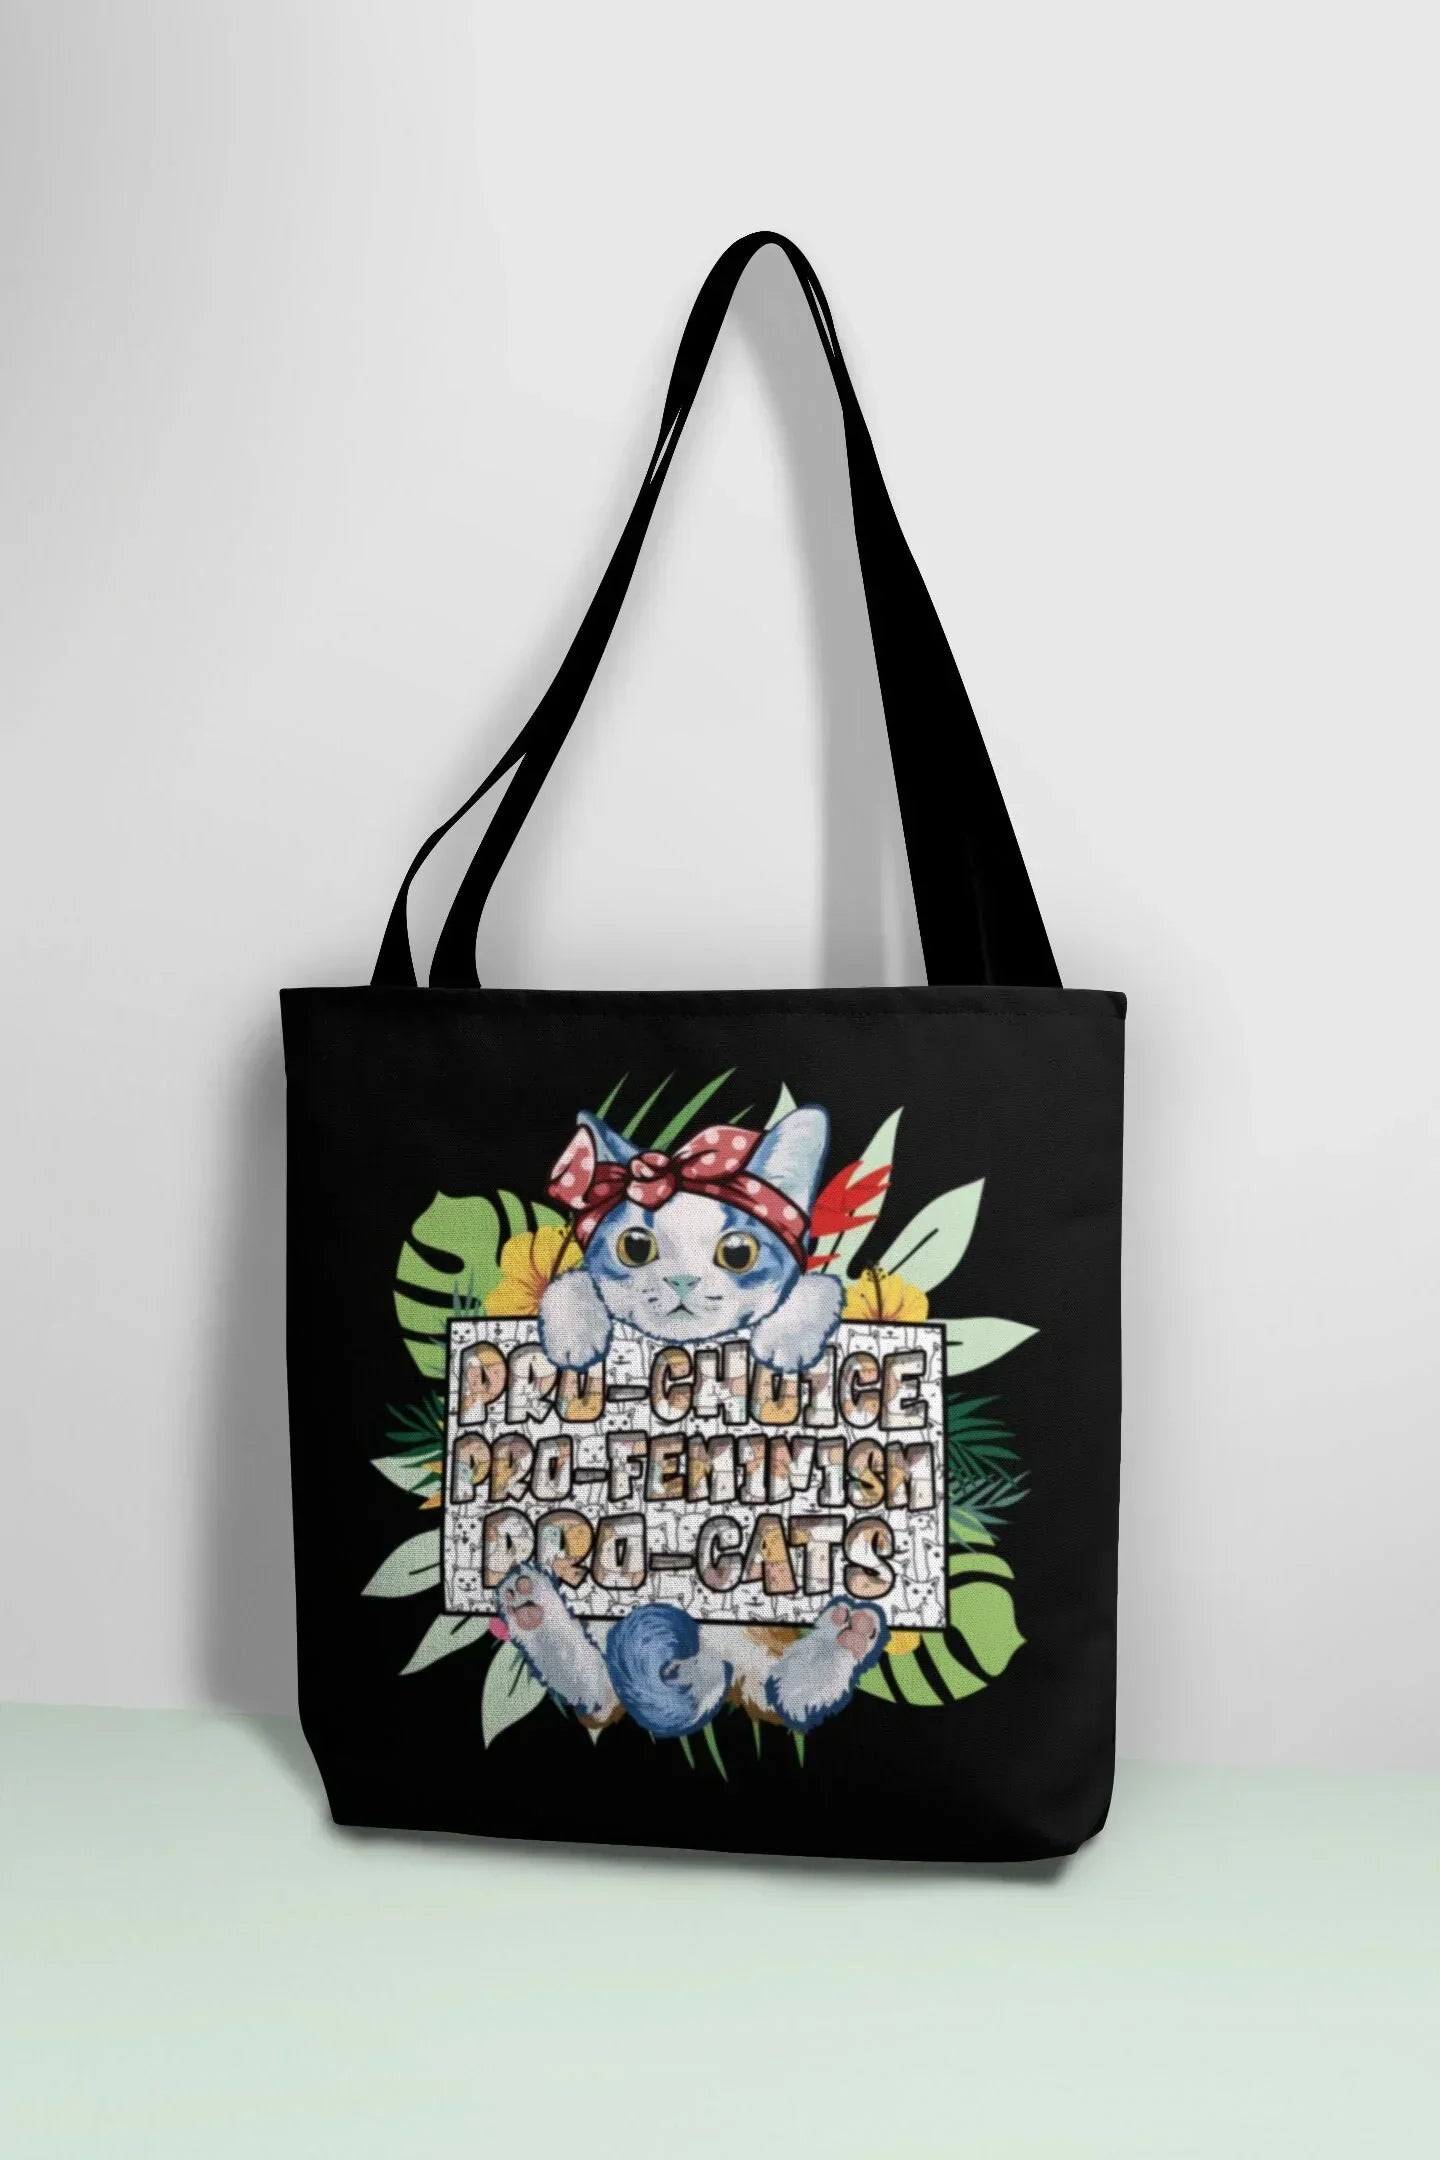 Cat Tote Bag, Aesthetic Tote Bag with Pockets, Hippie Cat Lovers Gift, Cat Mom Canvas Bag, Pro Choice Pro Feminism, Funny Cat Themed Gifts